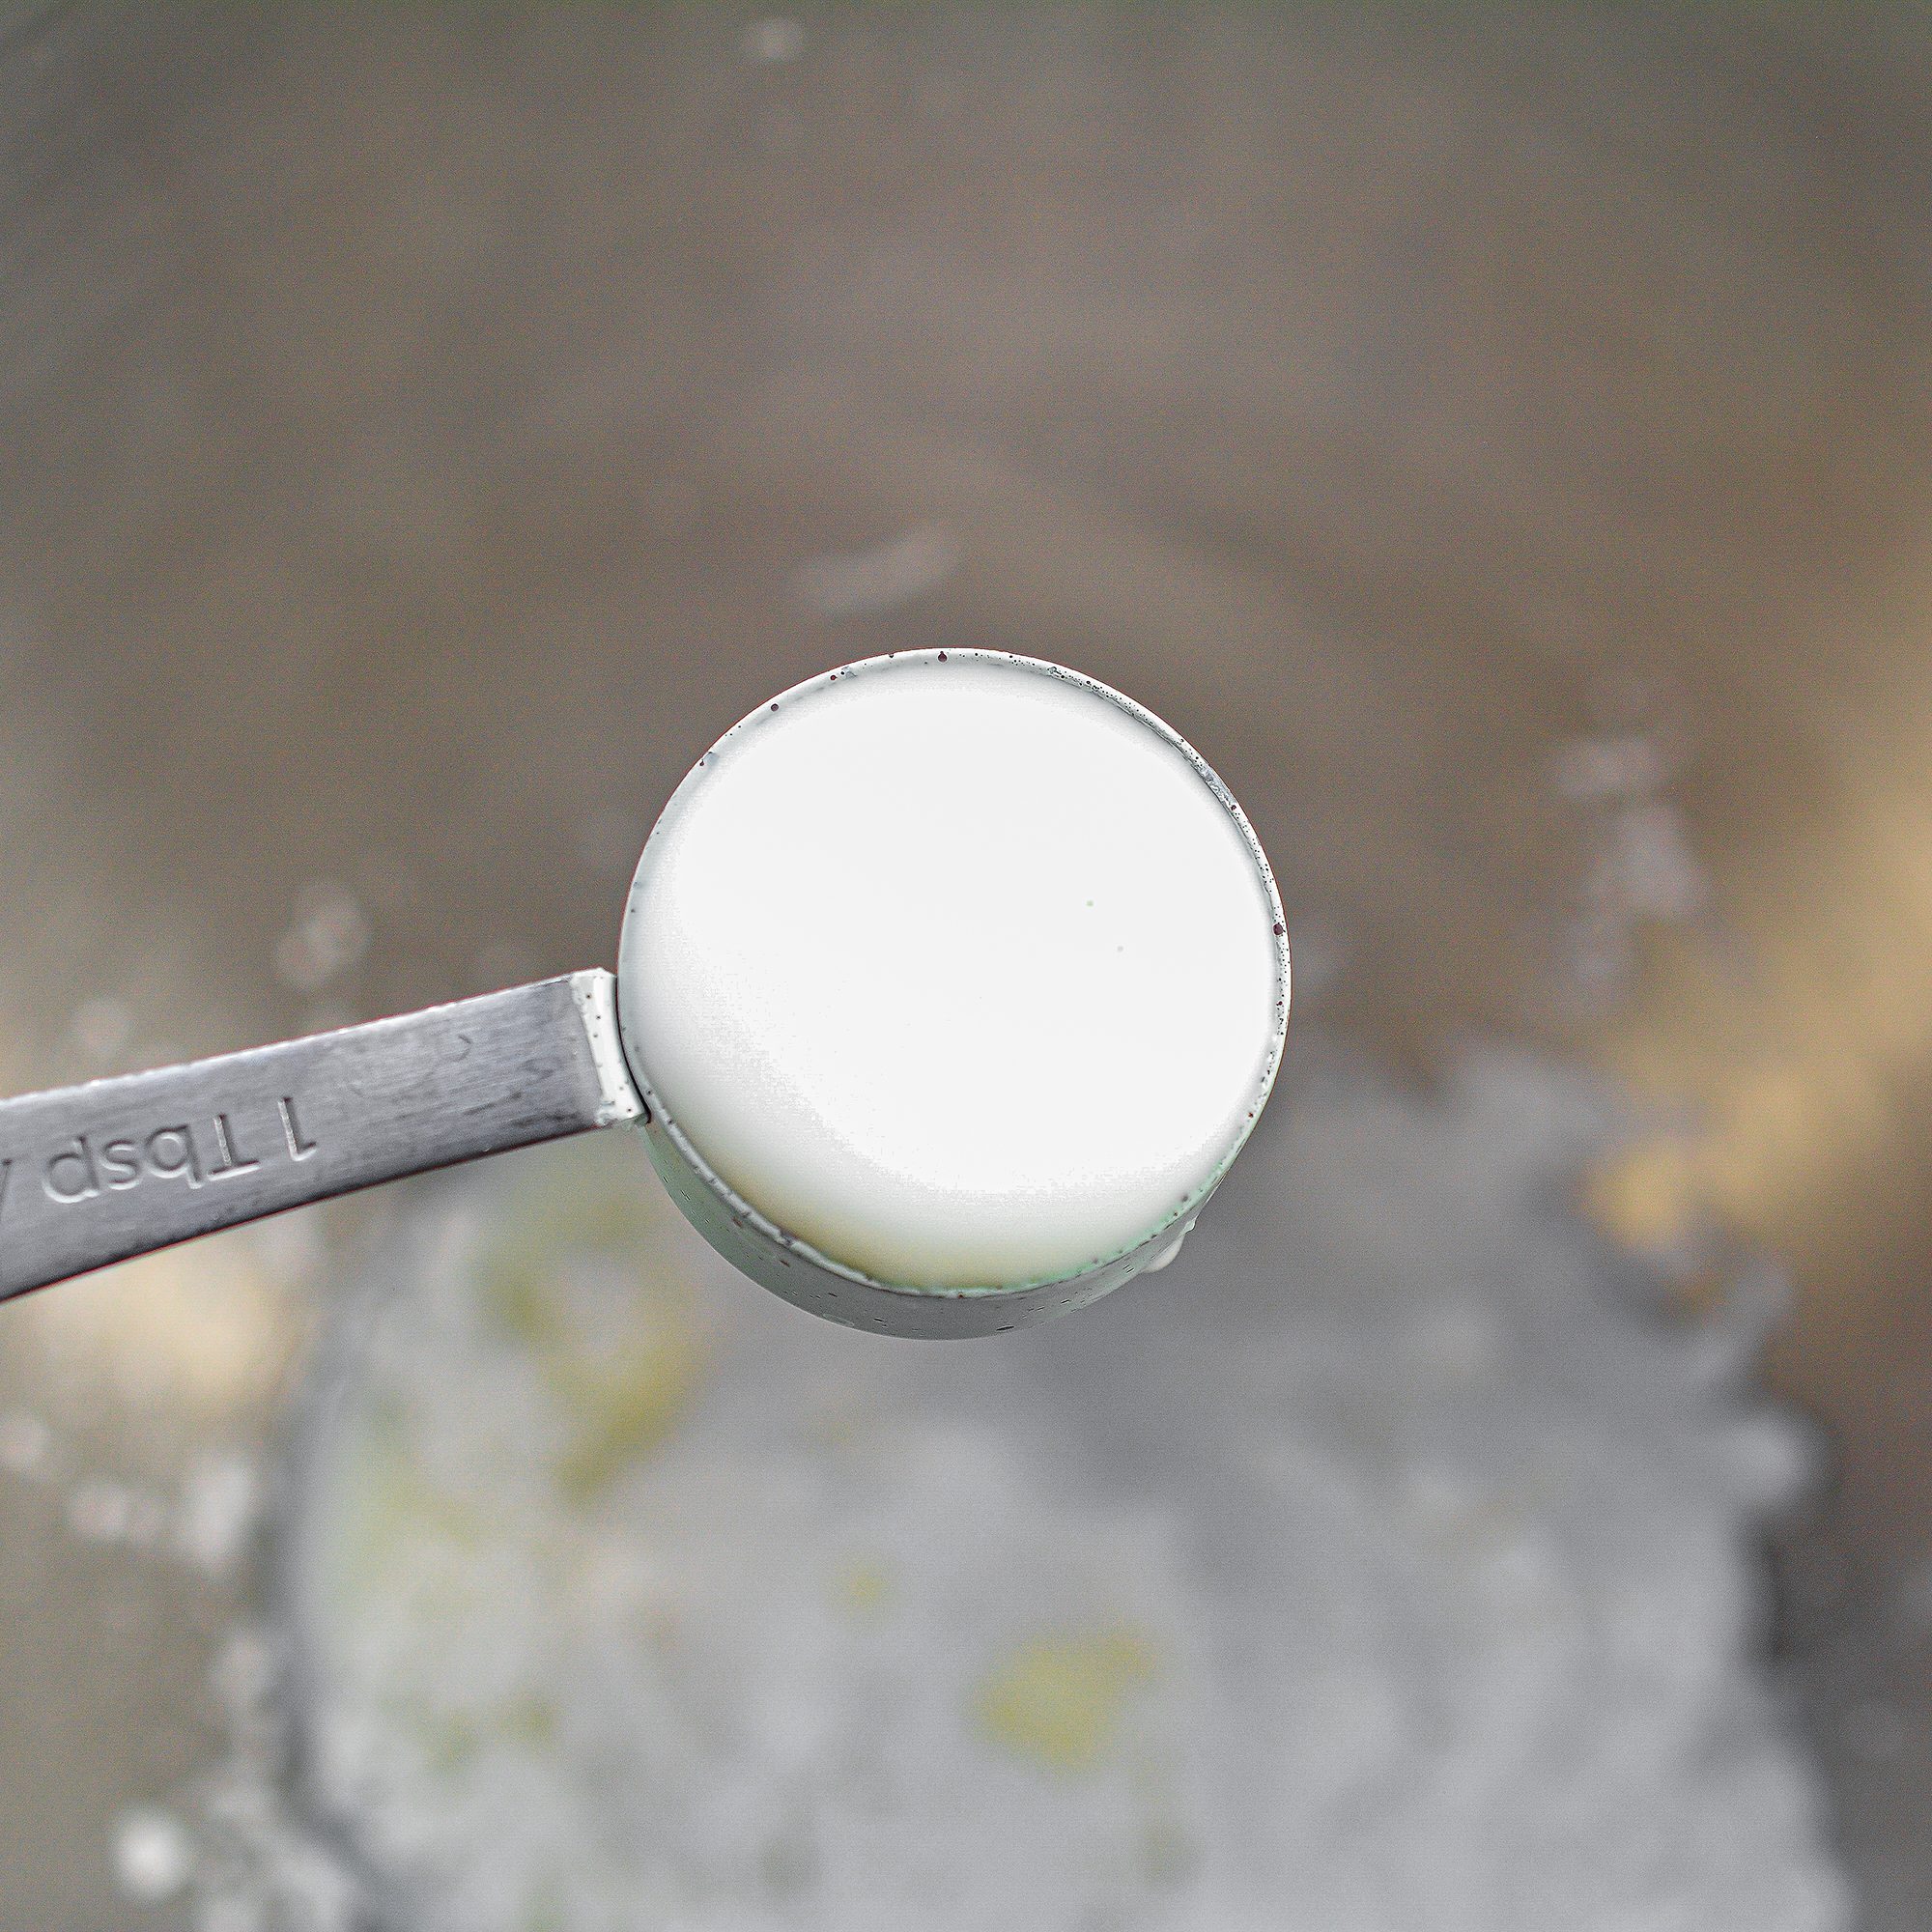 In a bowl, combine the powdered sugar, milk and vanilla until smooth.